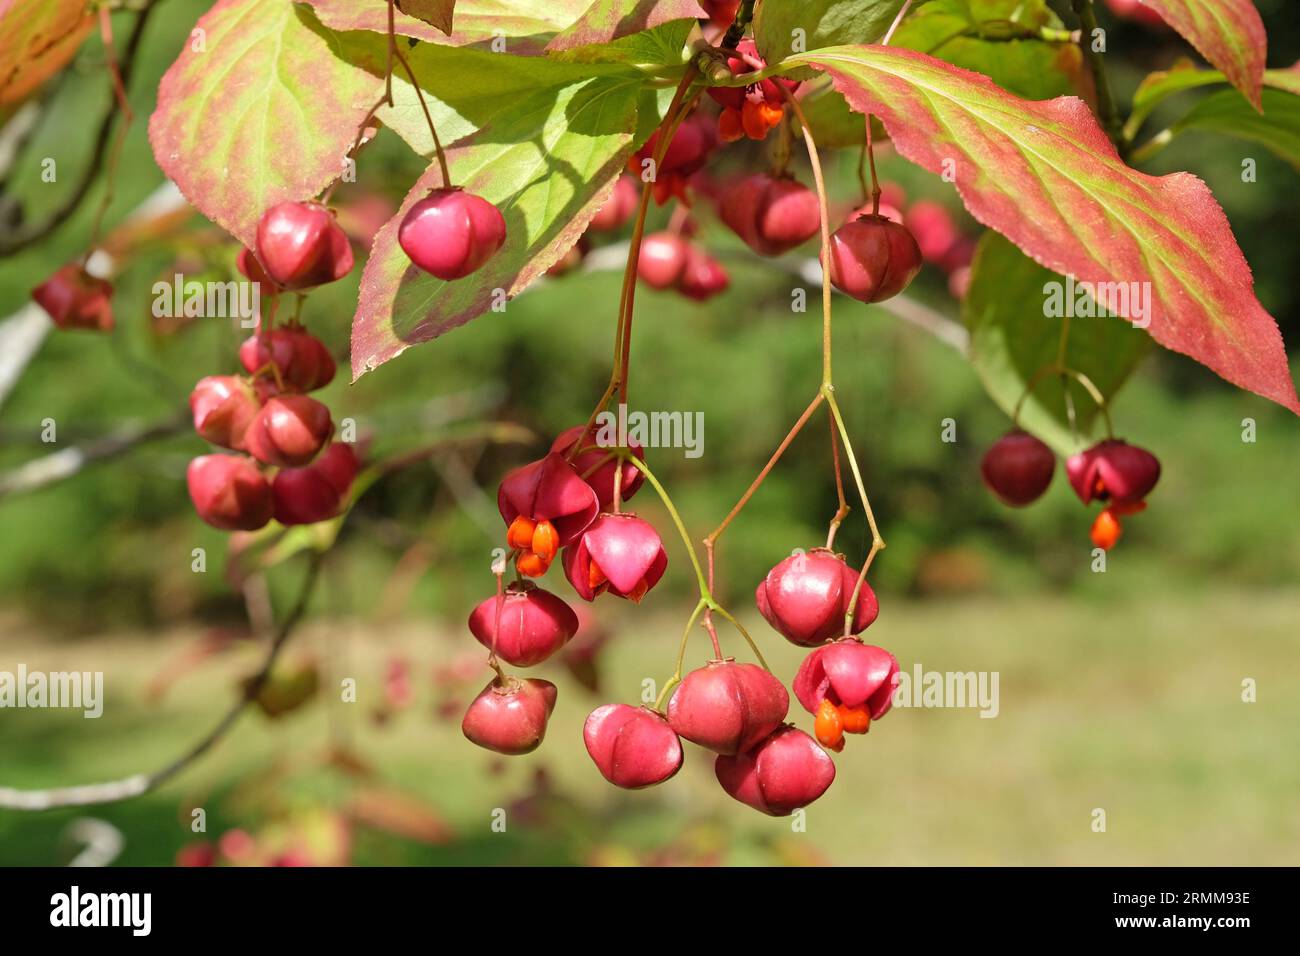 The red fruit of the Euonymus planipes, or a spindle tree. Stock Photo